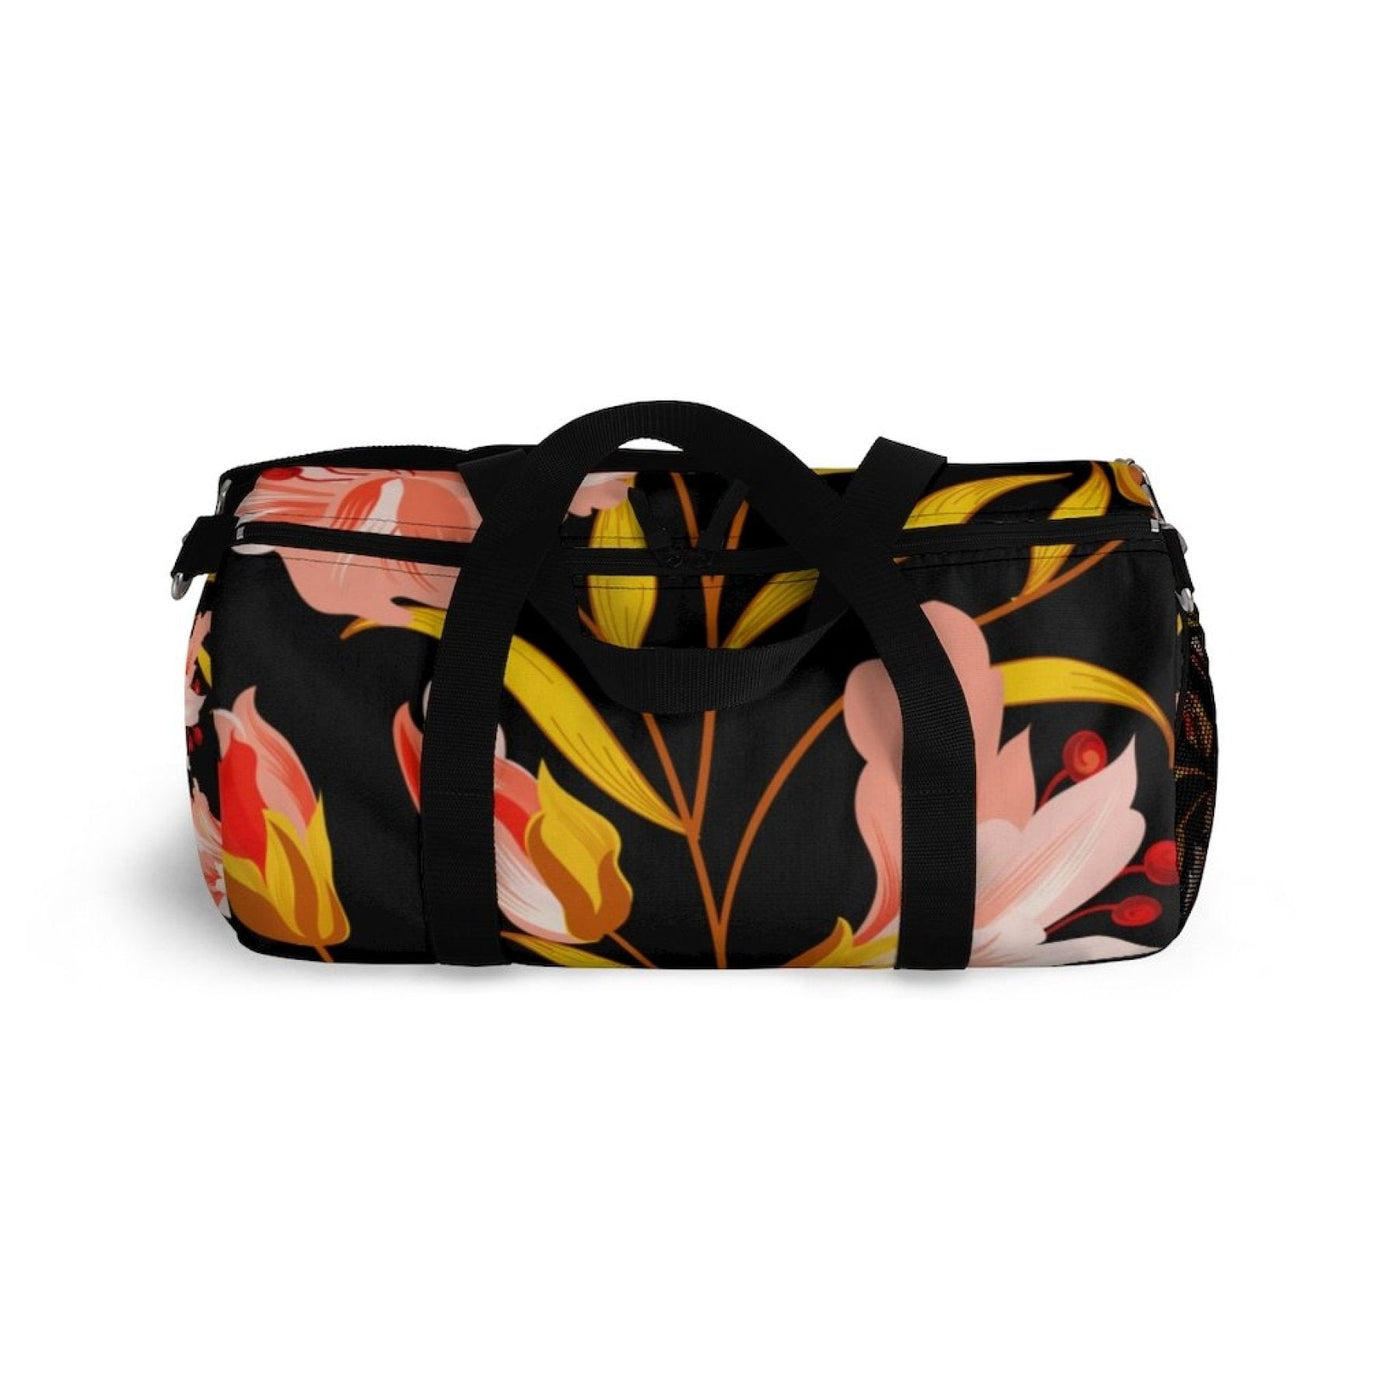 Duffel Bag Carry On Luggage Floral Multicolor - Bags | Duffel Bags